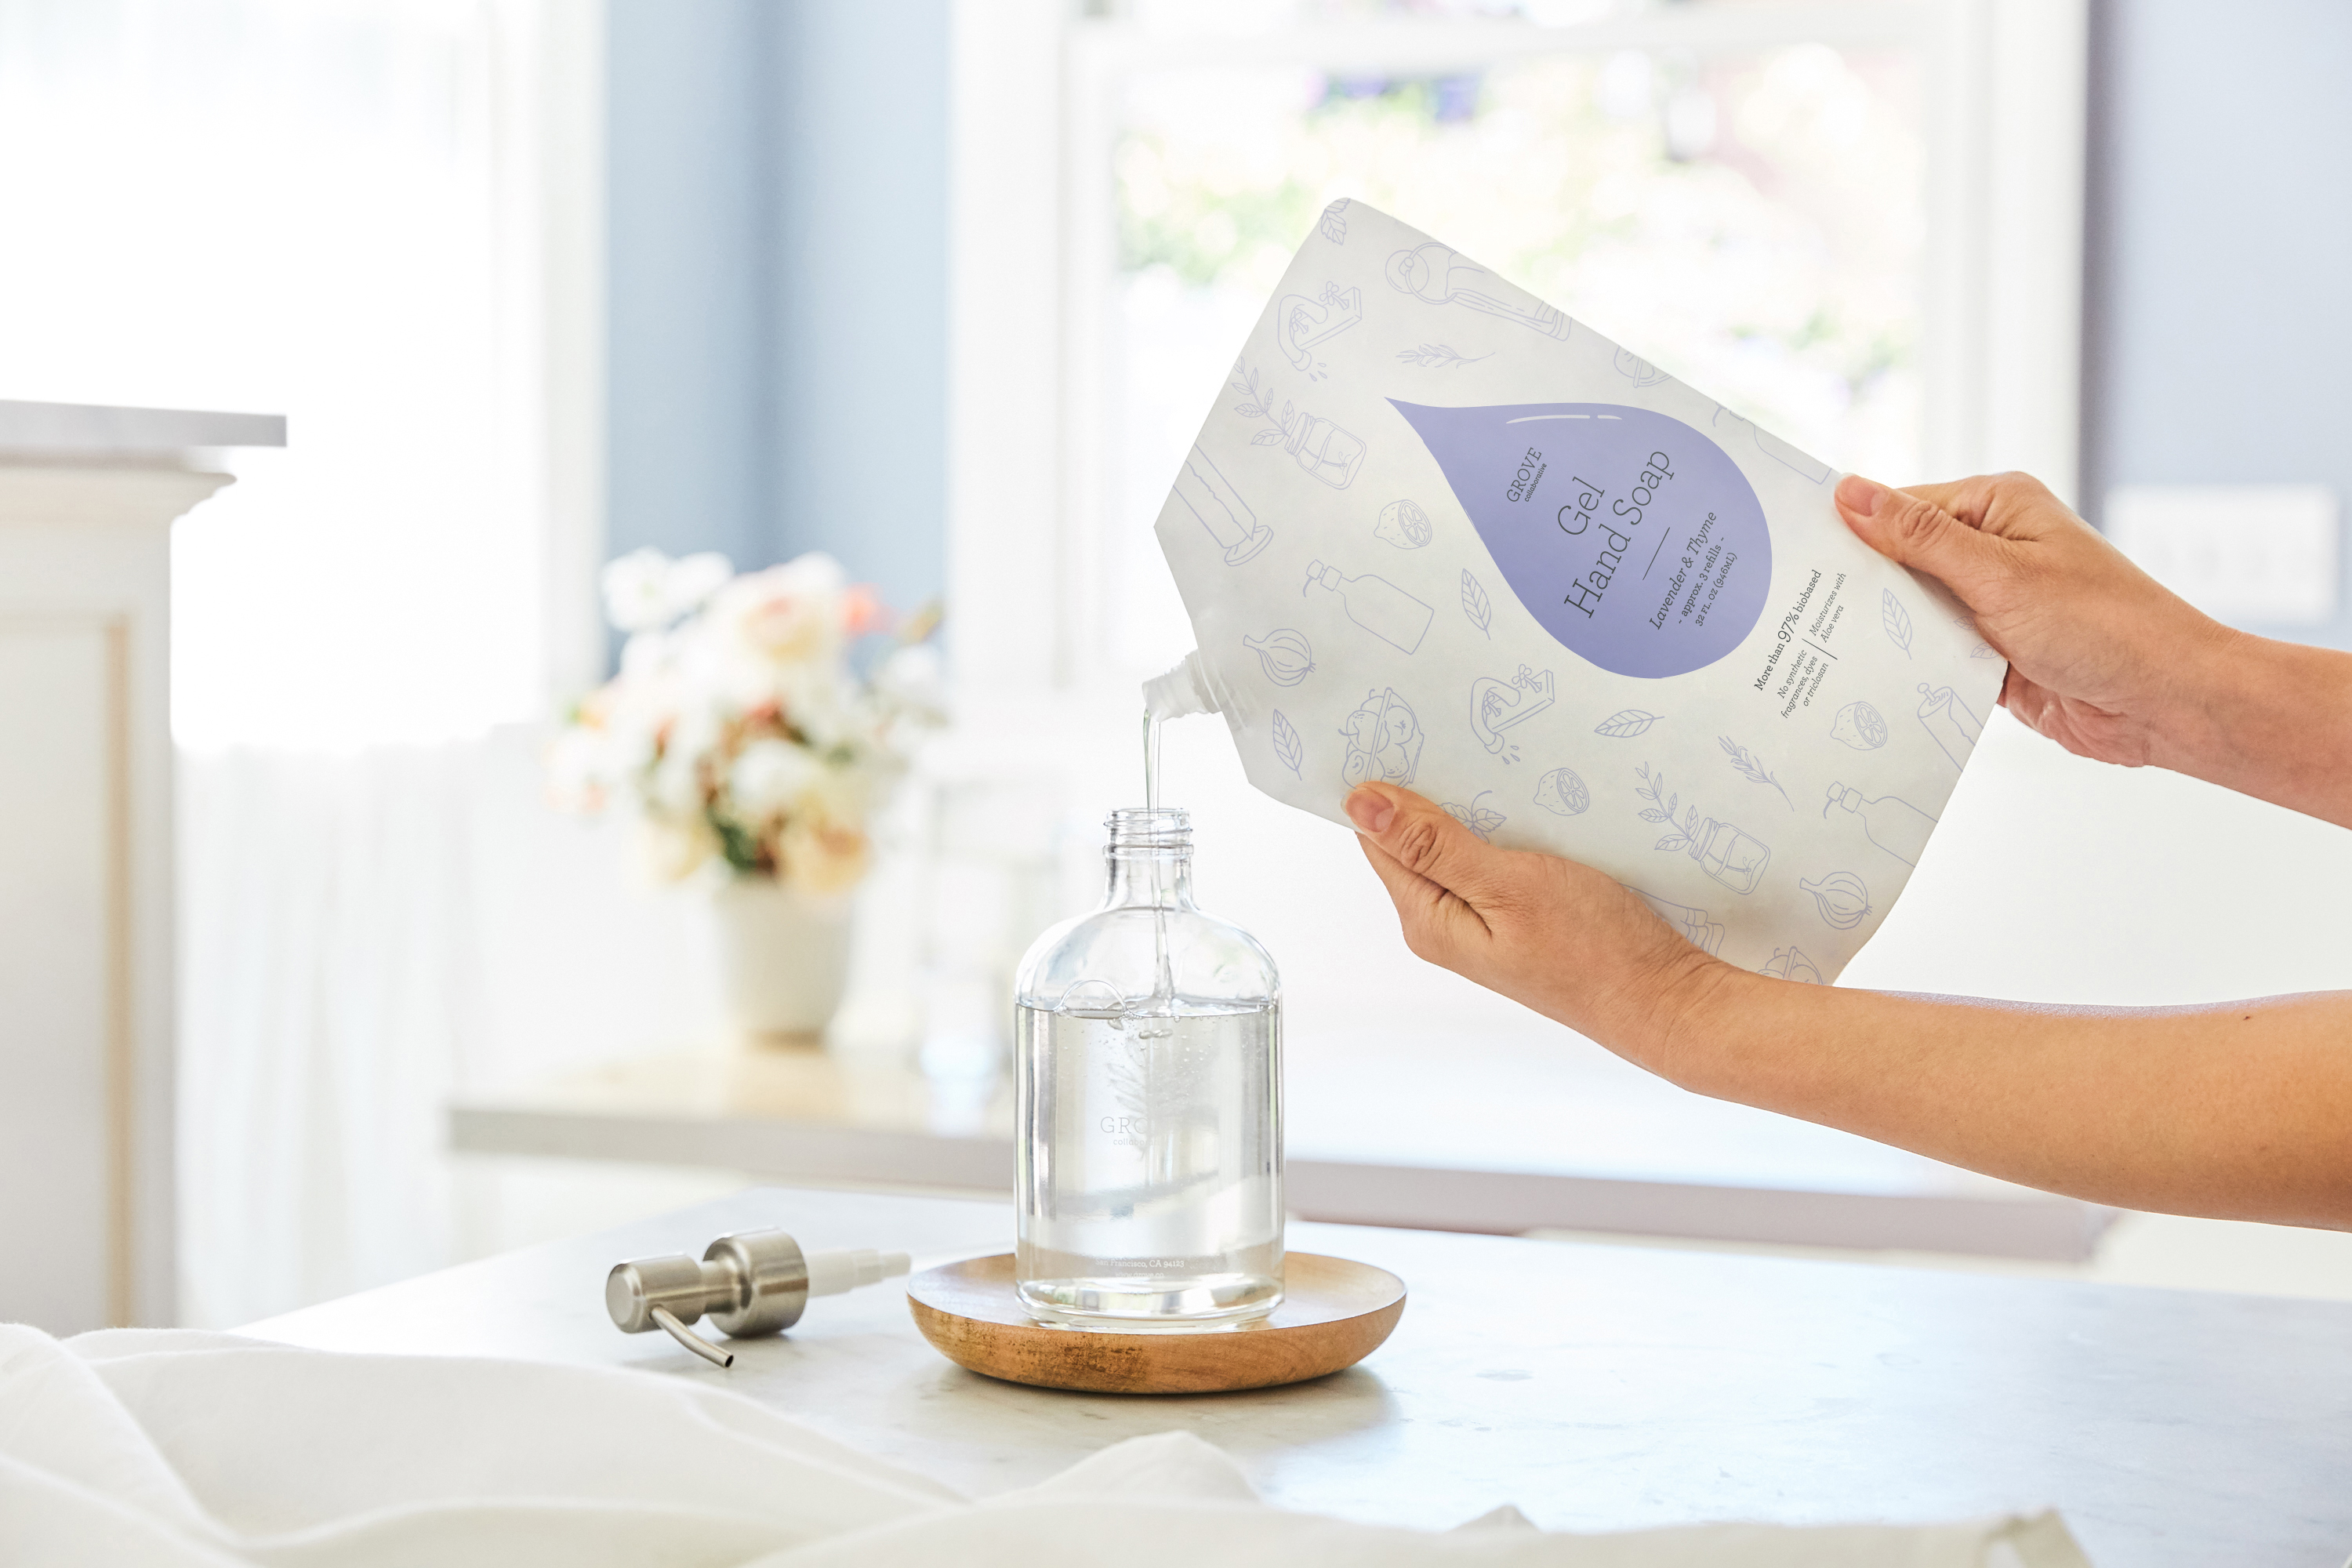 Hands pouring a refill pouch of Grove Gel Hand Soap into a clear soap dispenser